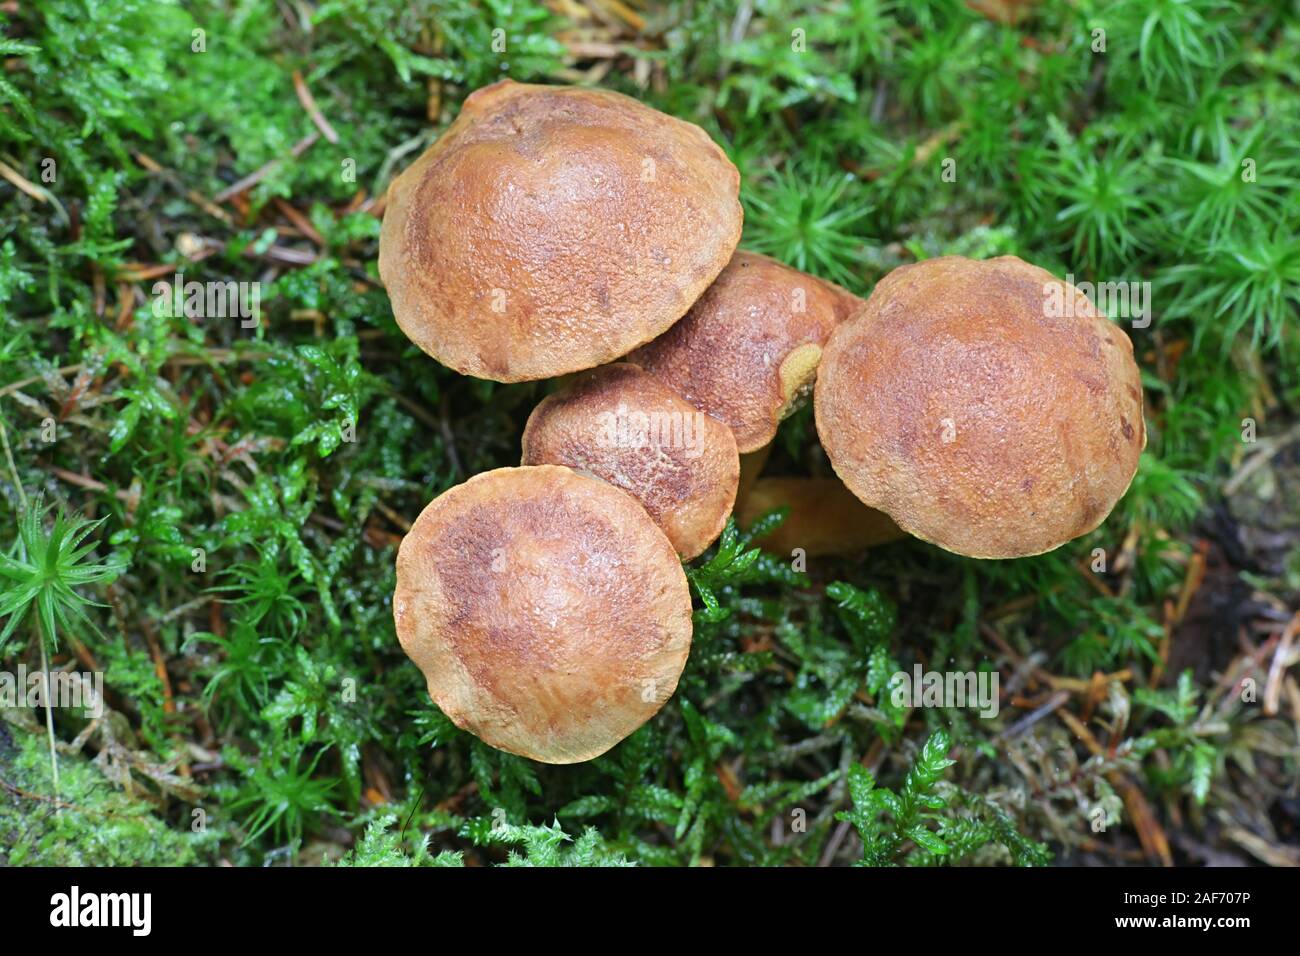 Chalciporus piperatus, commonly known as the peppery bolete, wild mushrooms from Finland Stock Photo